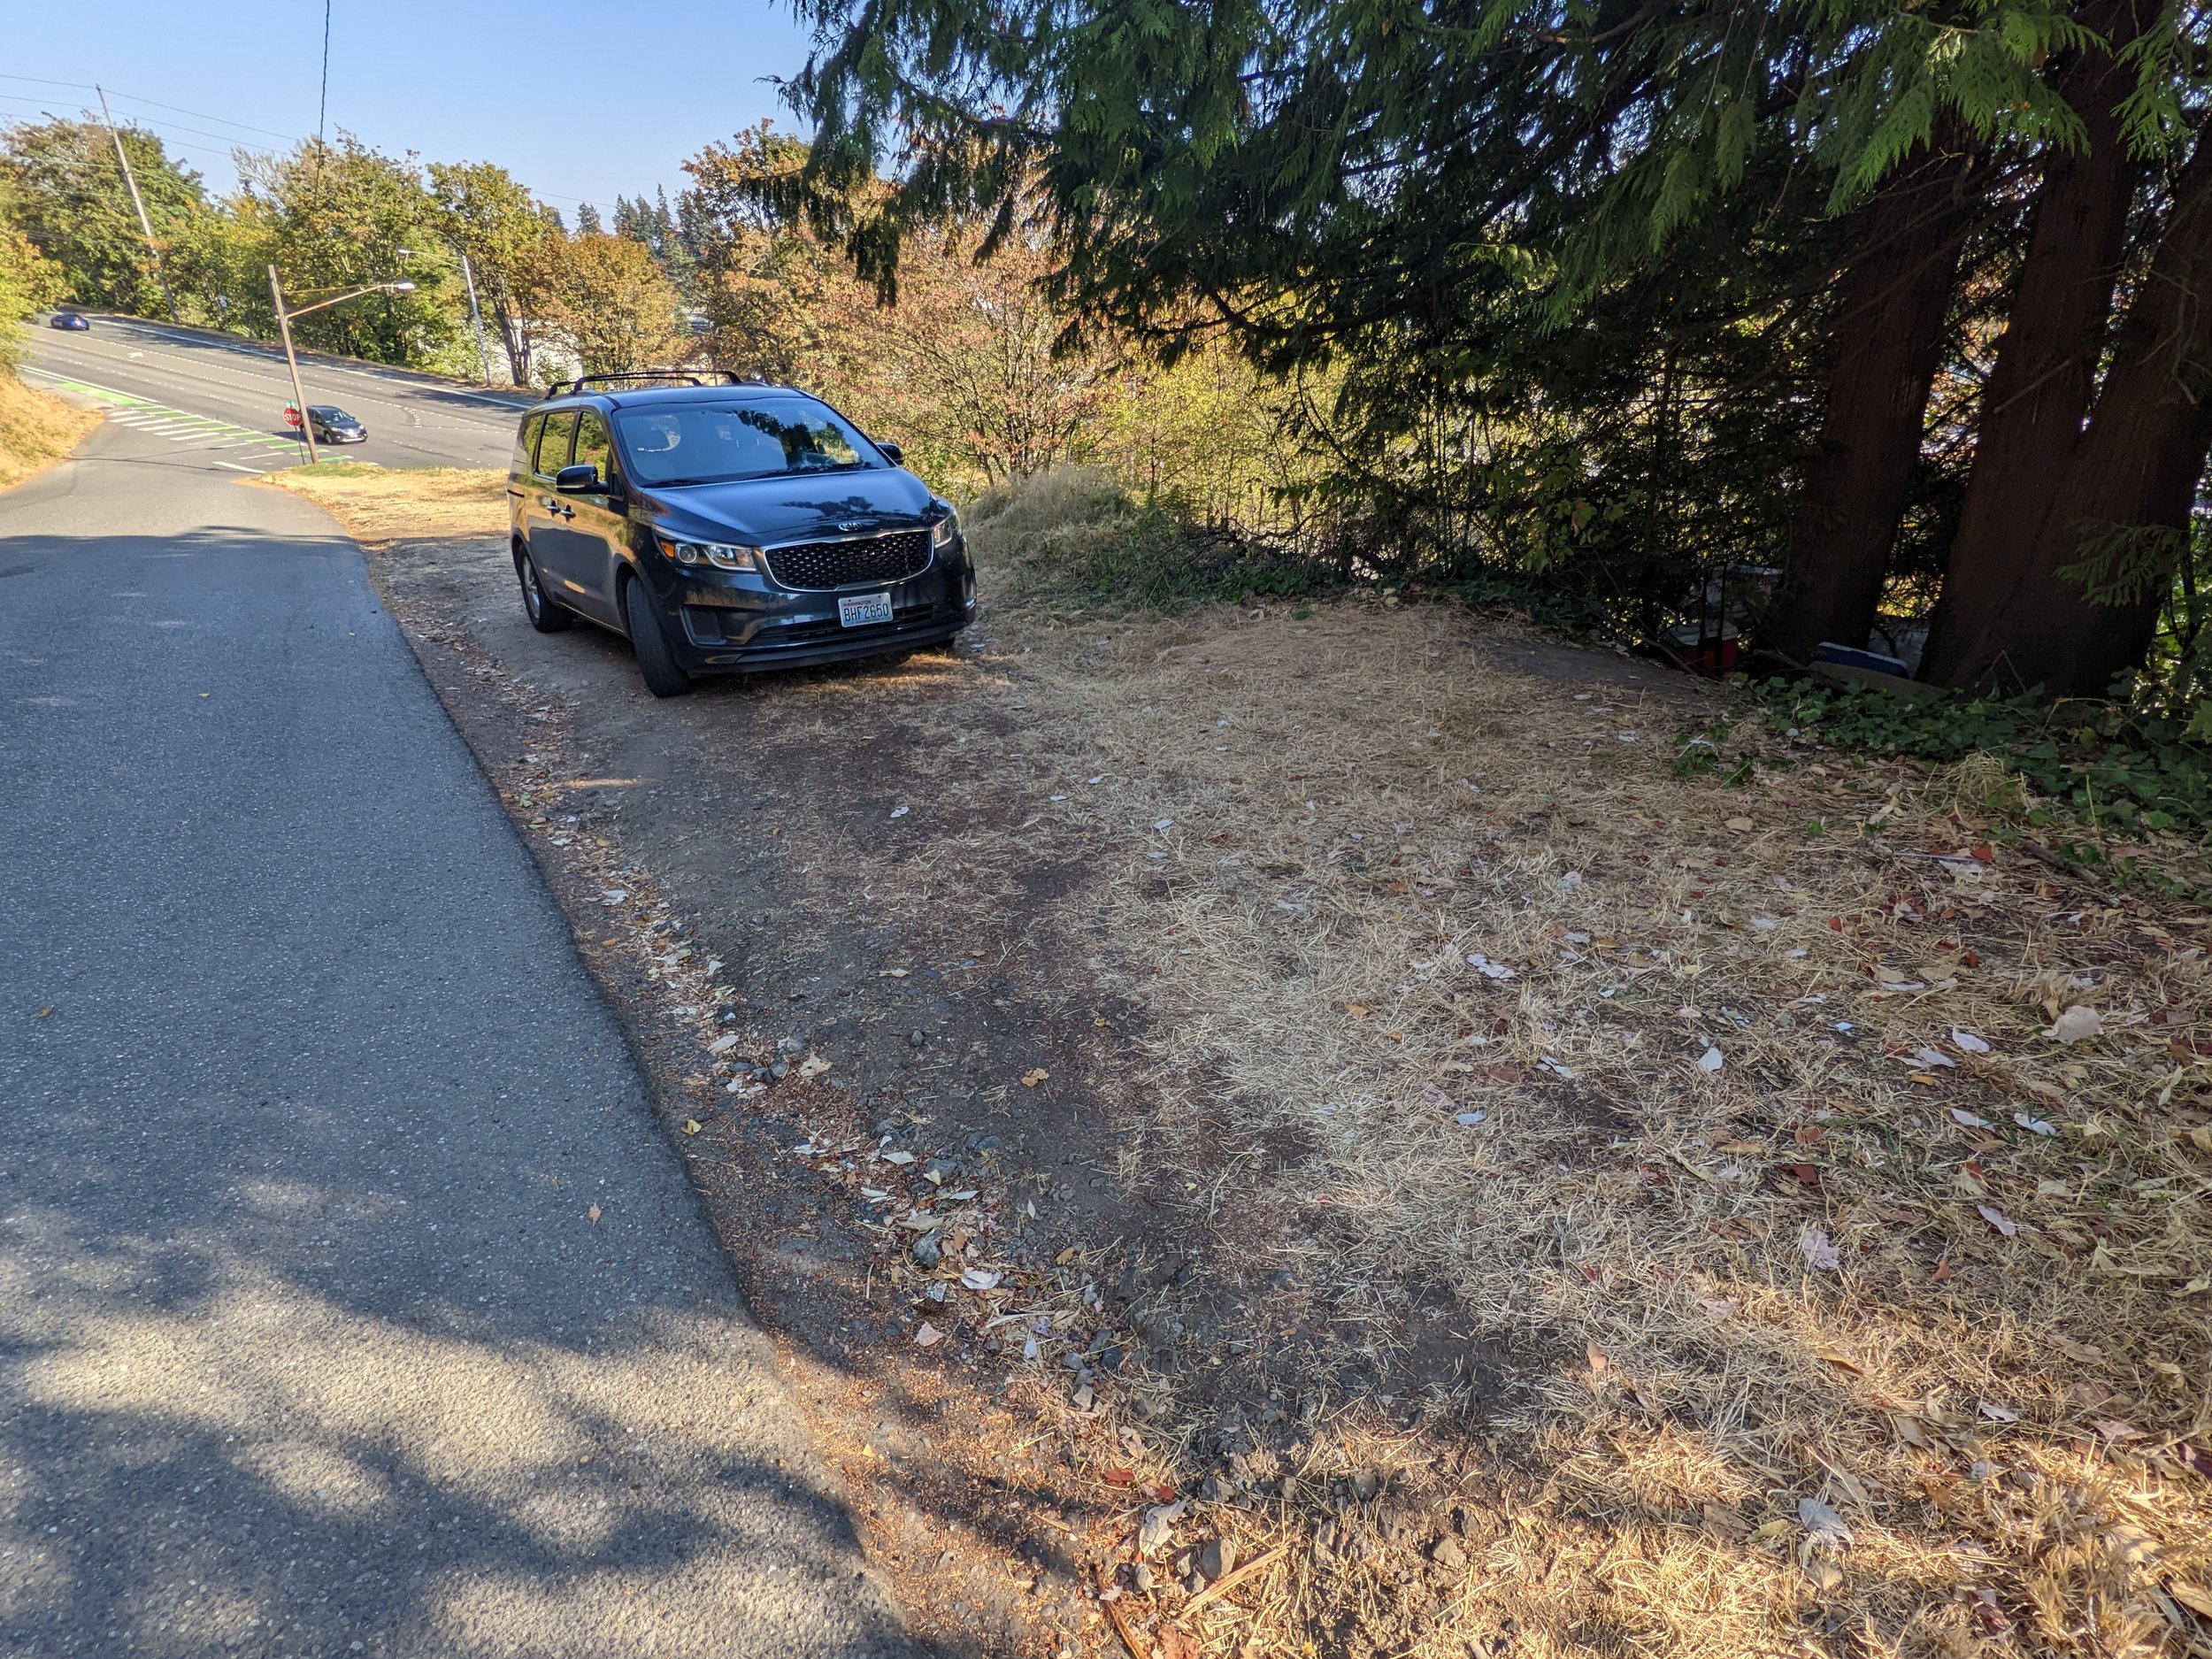 Parking along cleanup site